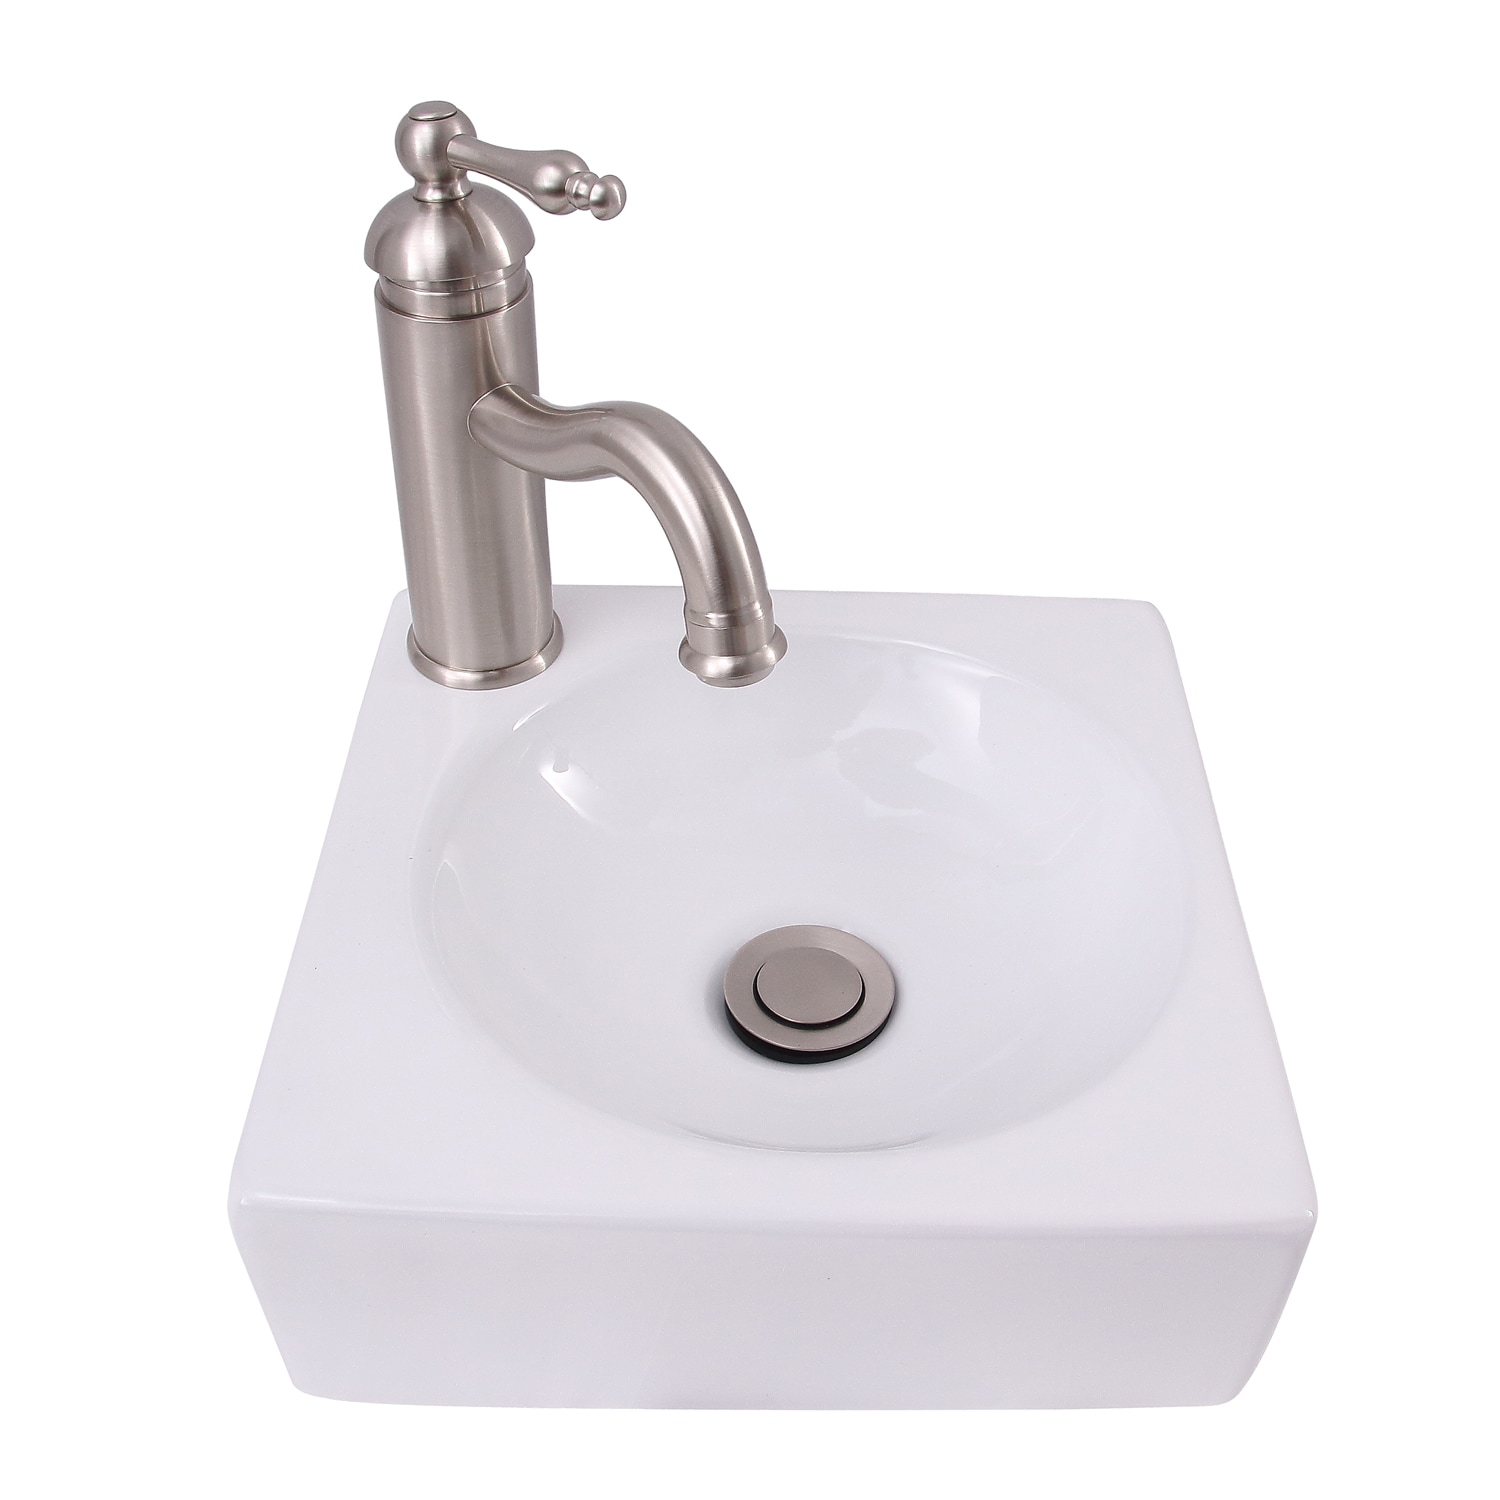 Barclay White Wall-mount Square Modern Bathroom Sink (11.12-in x 11.12-in)